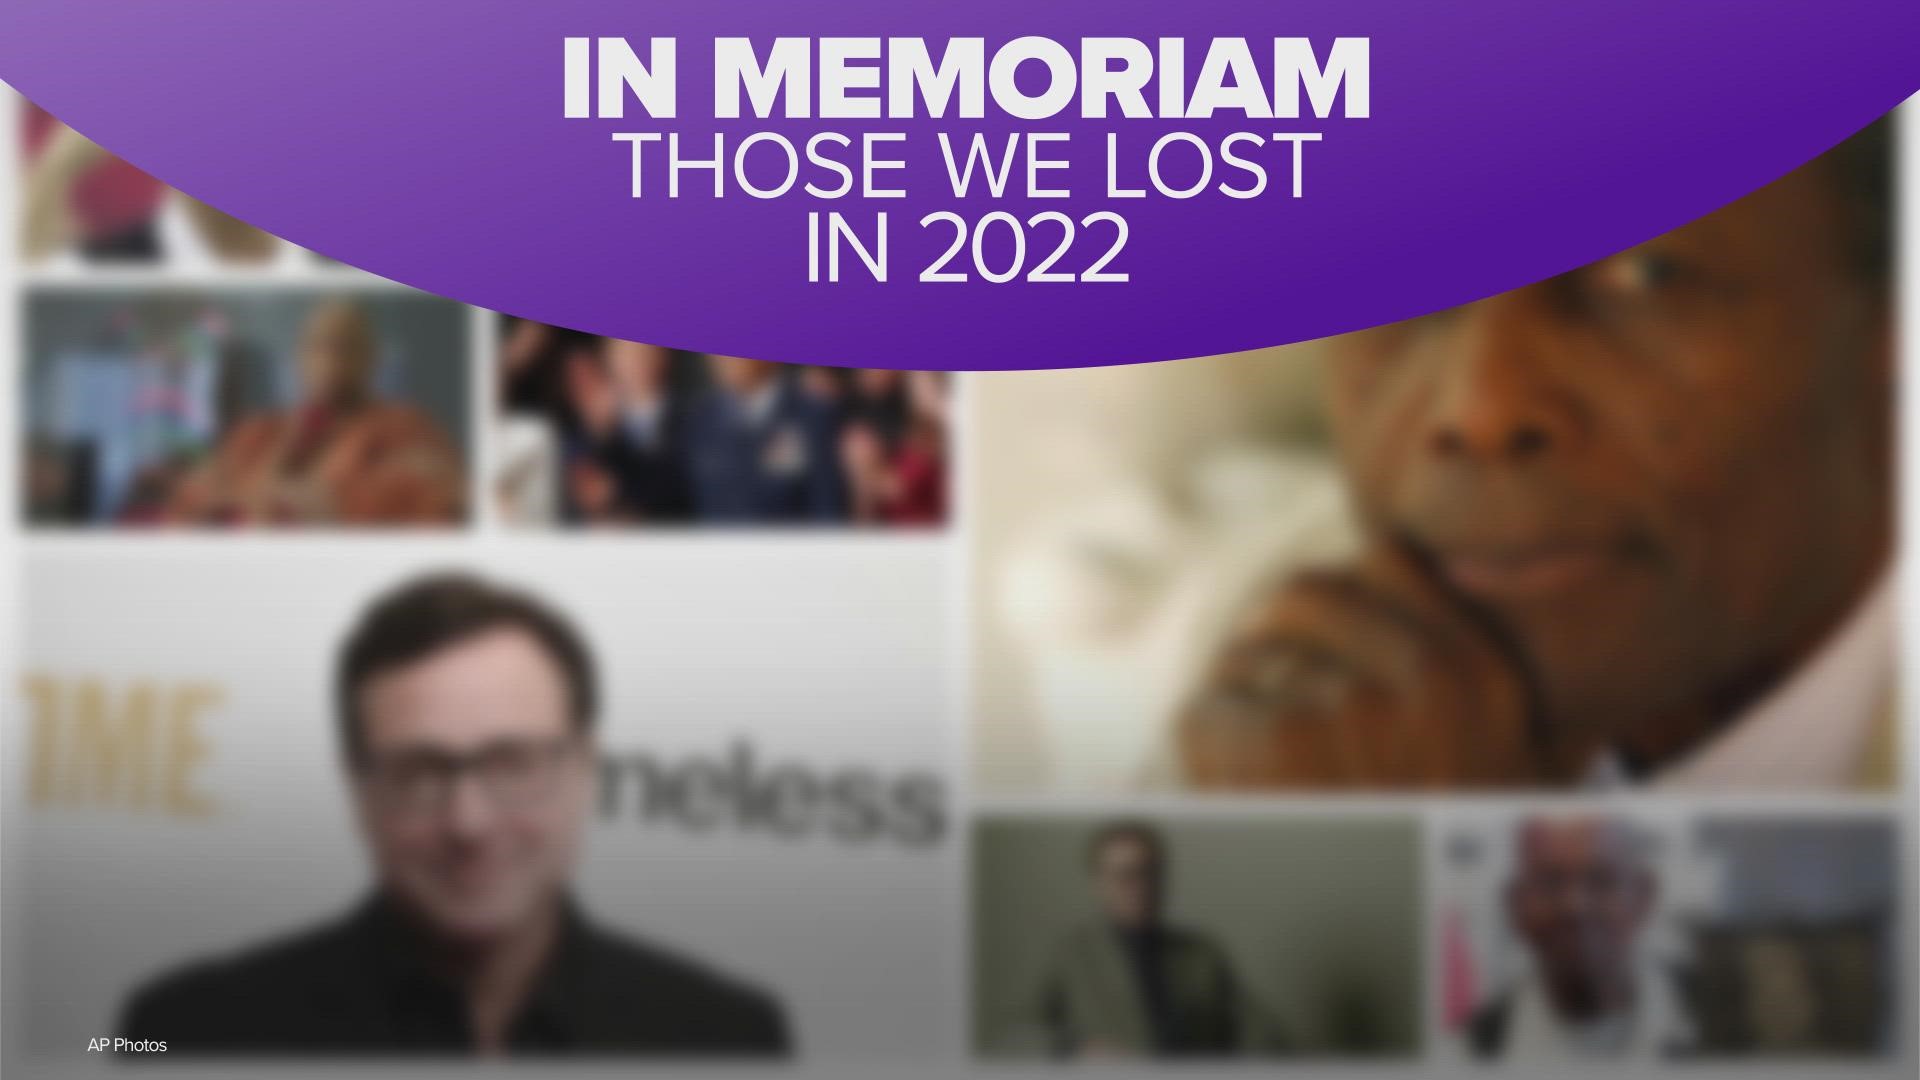 A groundbreaking actor, a beloved TV dad and two centenarians who fought in World War II are some of the legends who passed away in 2022.